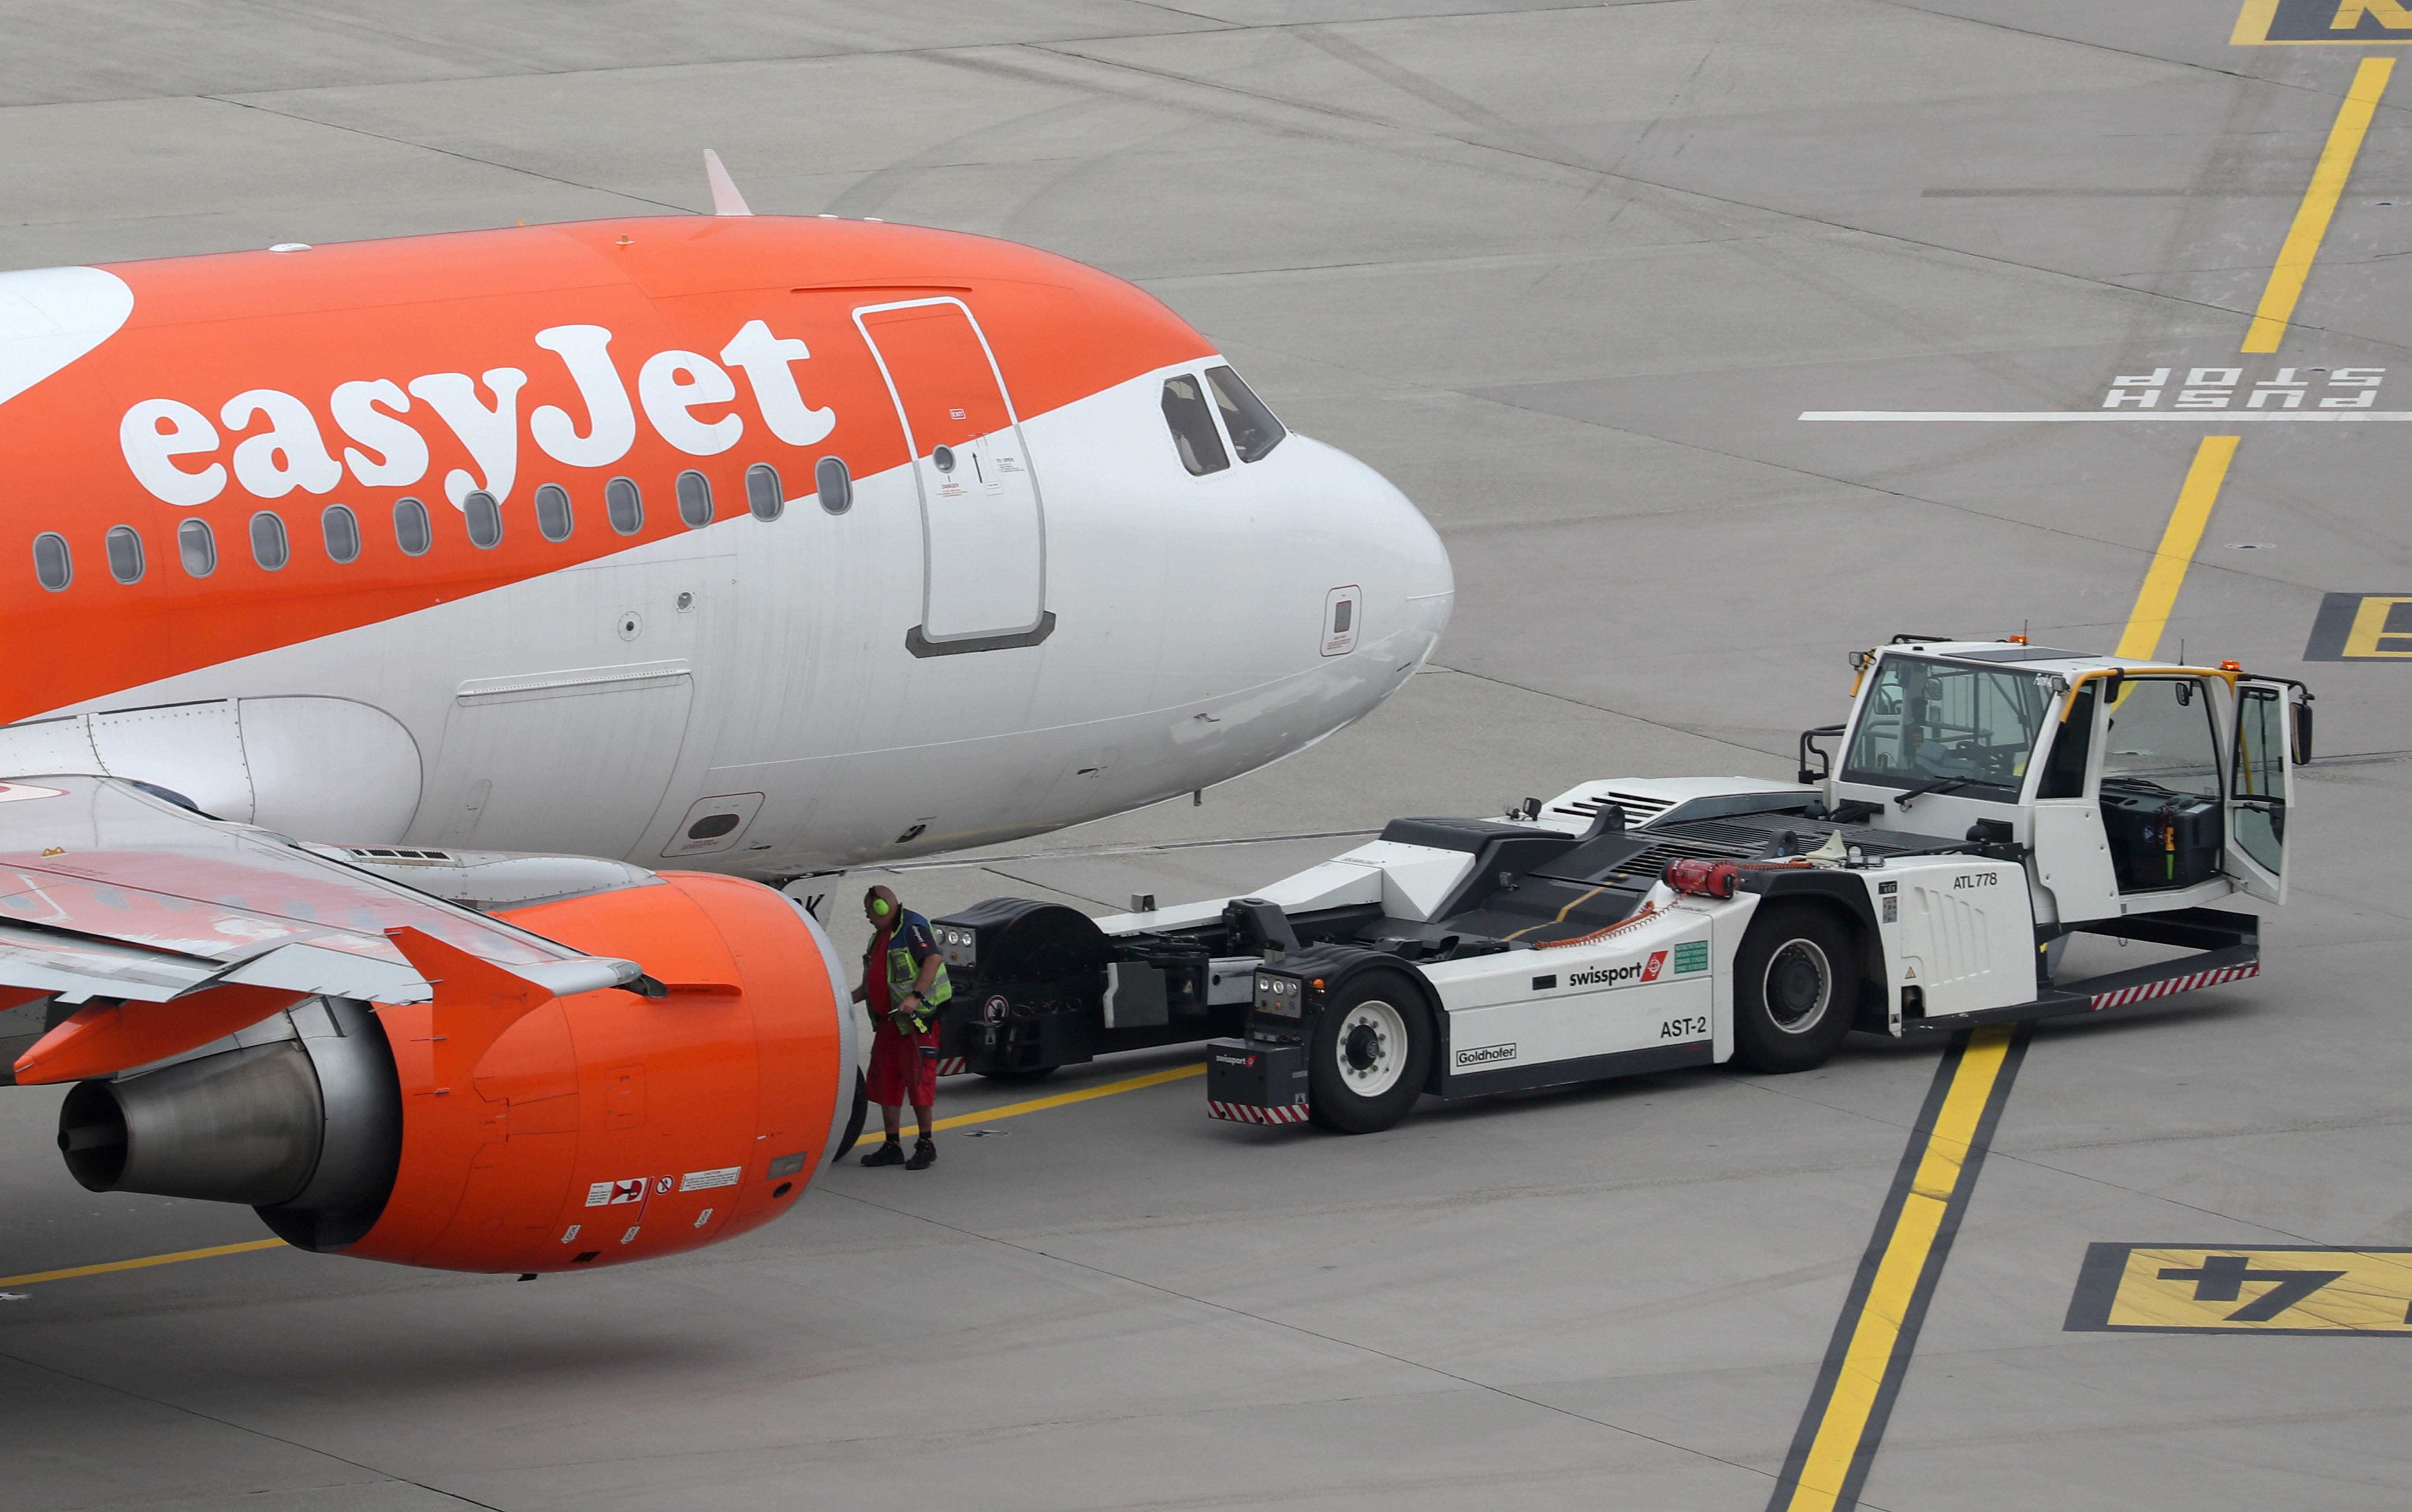 A Goldhofer pushback tractor of air services provider Swissport stands in front of an Easy Jet aircraft at Zurich Airport